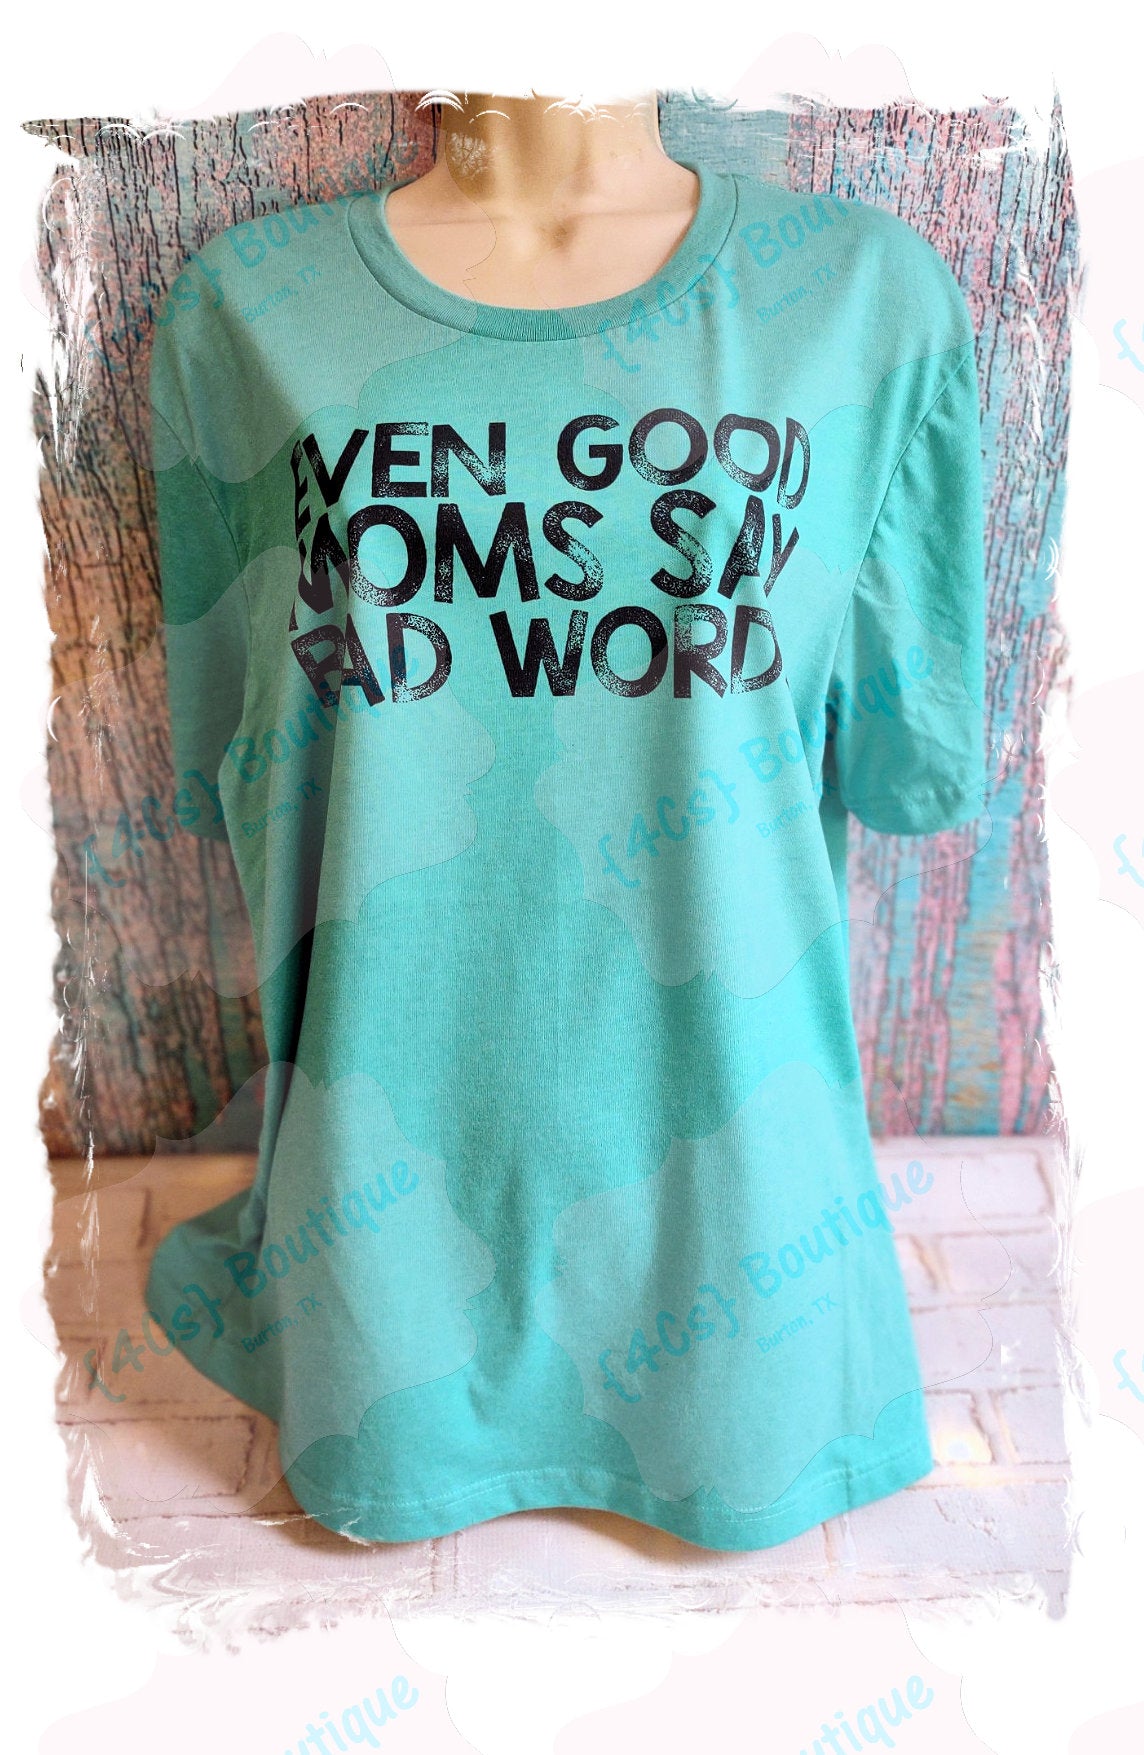 Even Good Moms Say Bad Words Sublimation Shirt